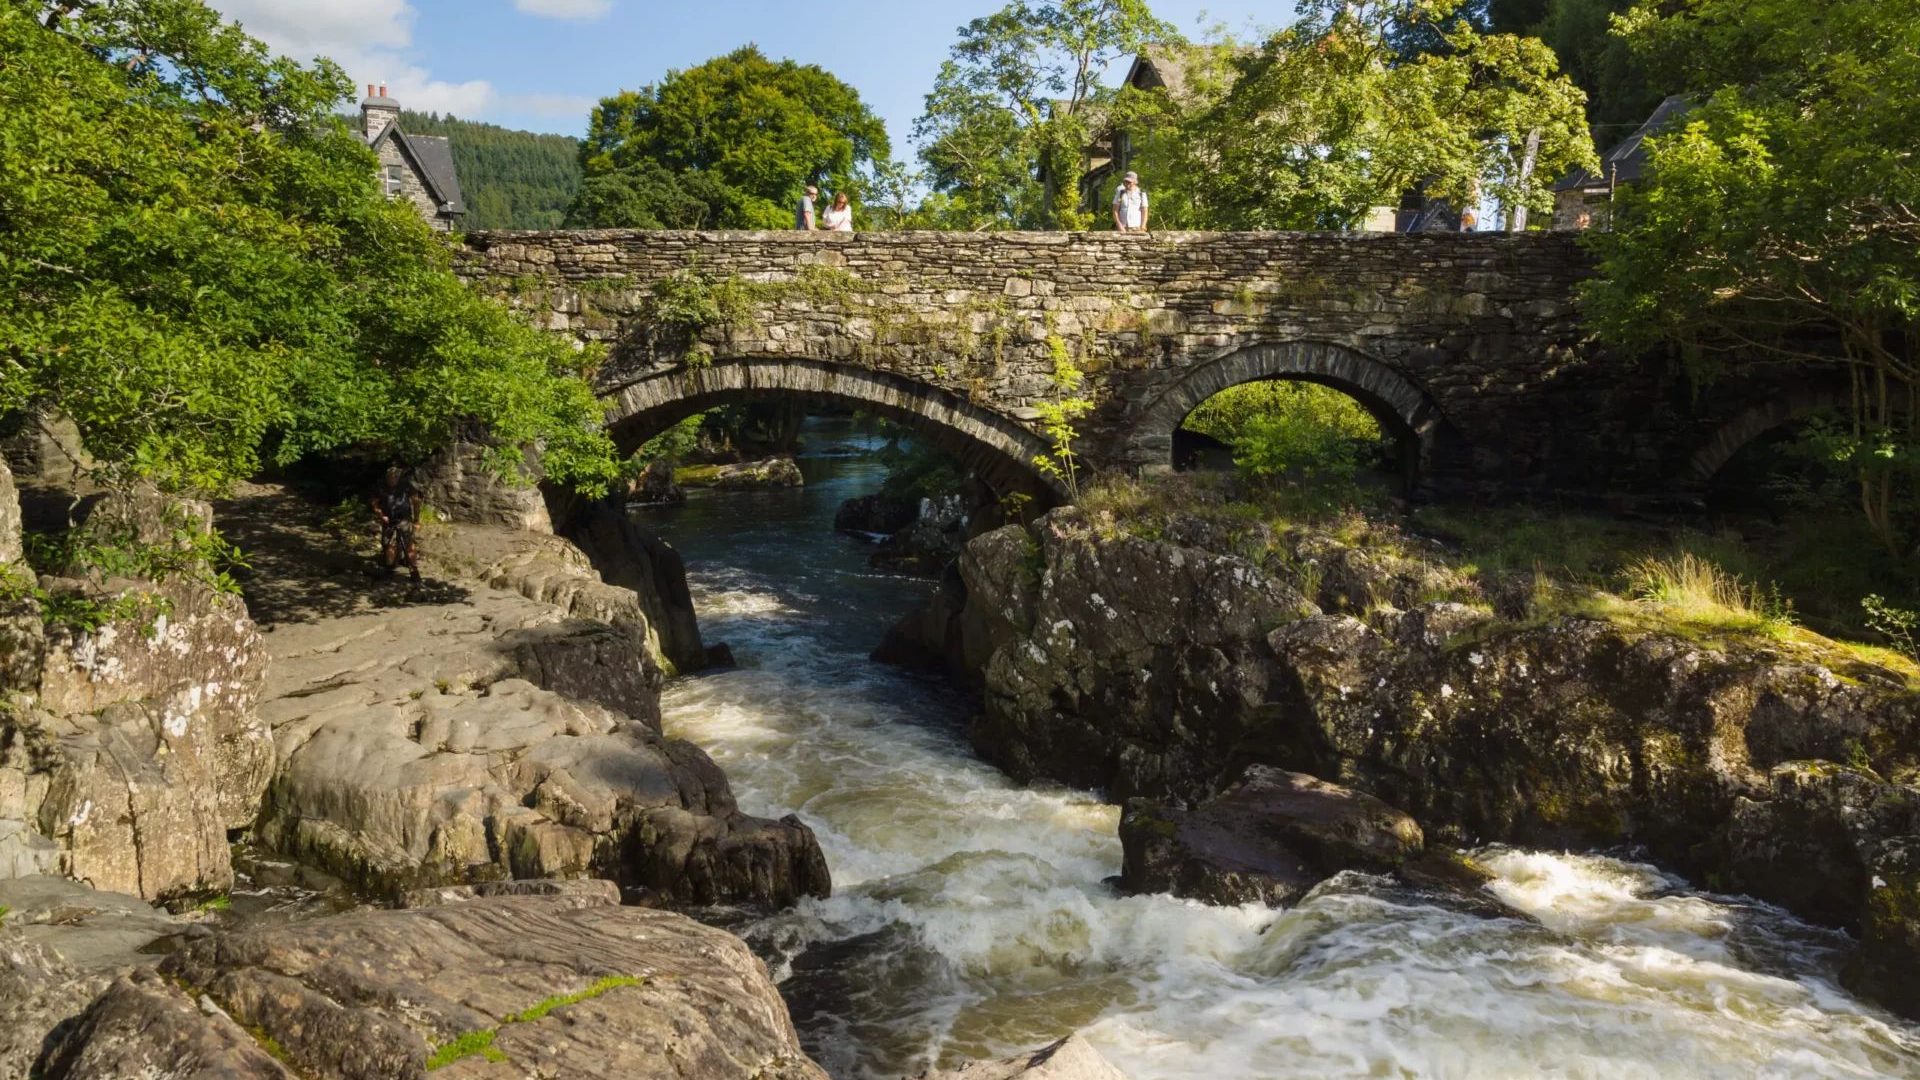 A bridge over the river in Betws-y-Coed, Wales